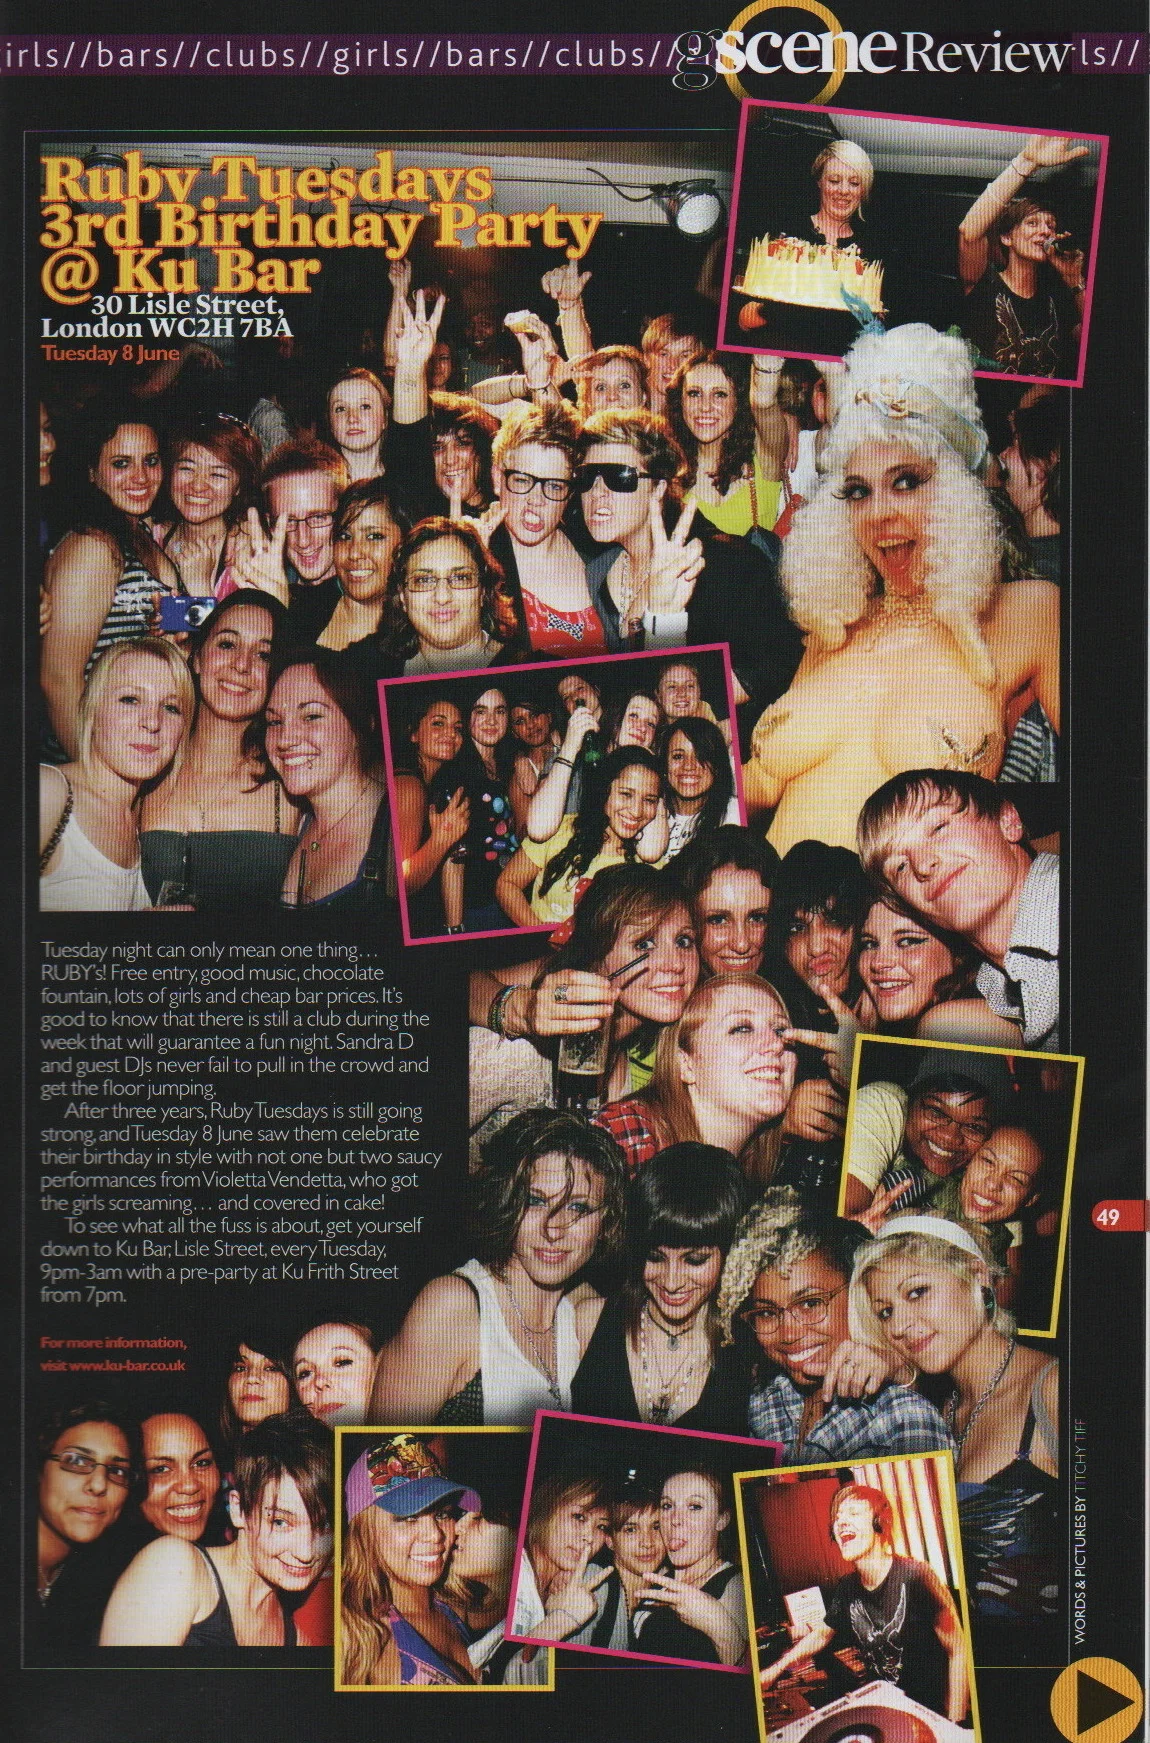 y2k Club night review section of g3 magazine. Picture shows lesbians having fun on night out in Ku Bar. 